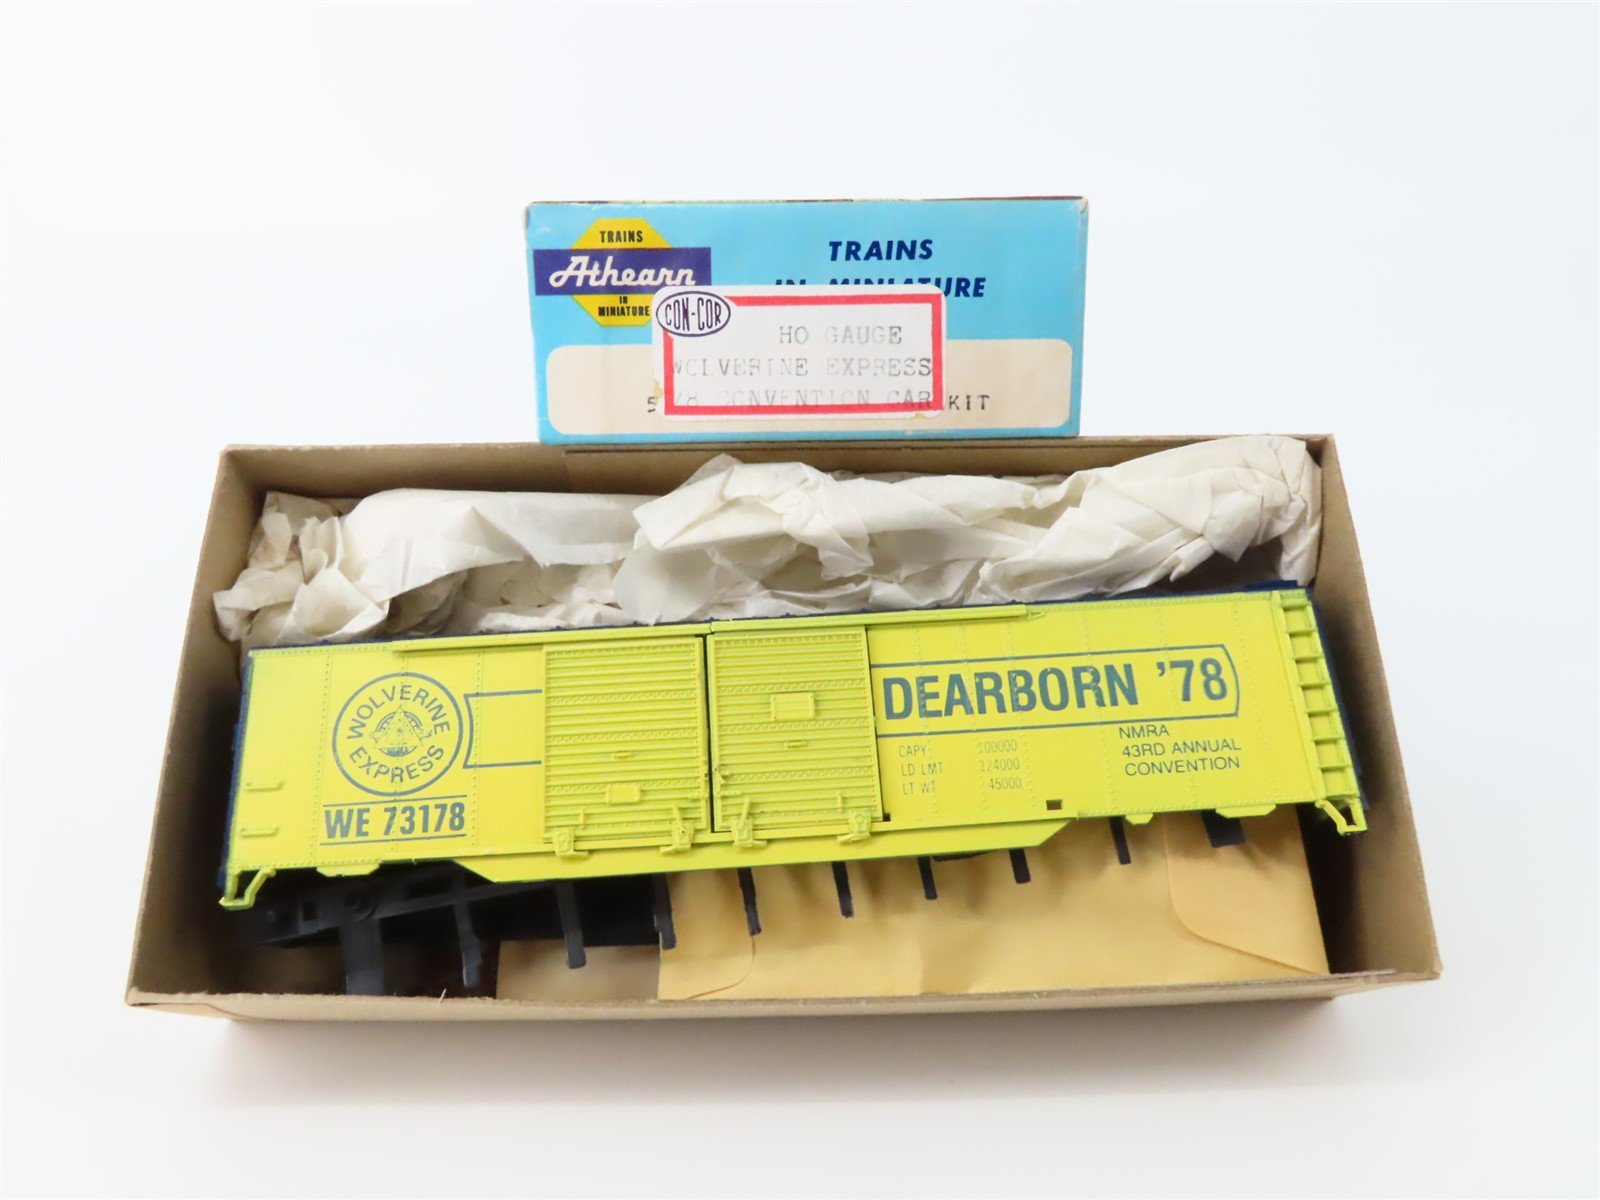 HO Scale Athearn Kit "Wolverine Express" 50' Box Car #73178 "Dearborn '78"